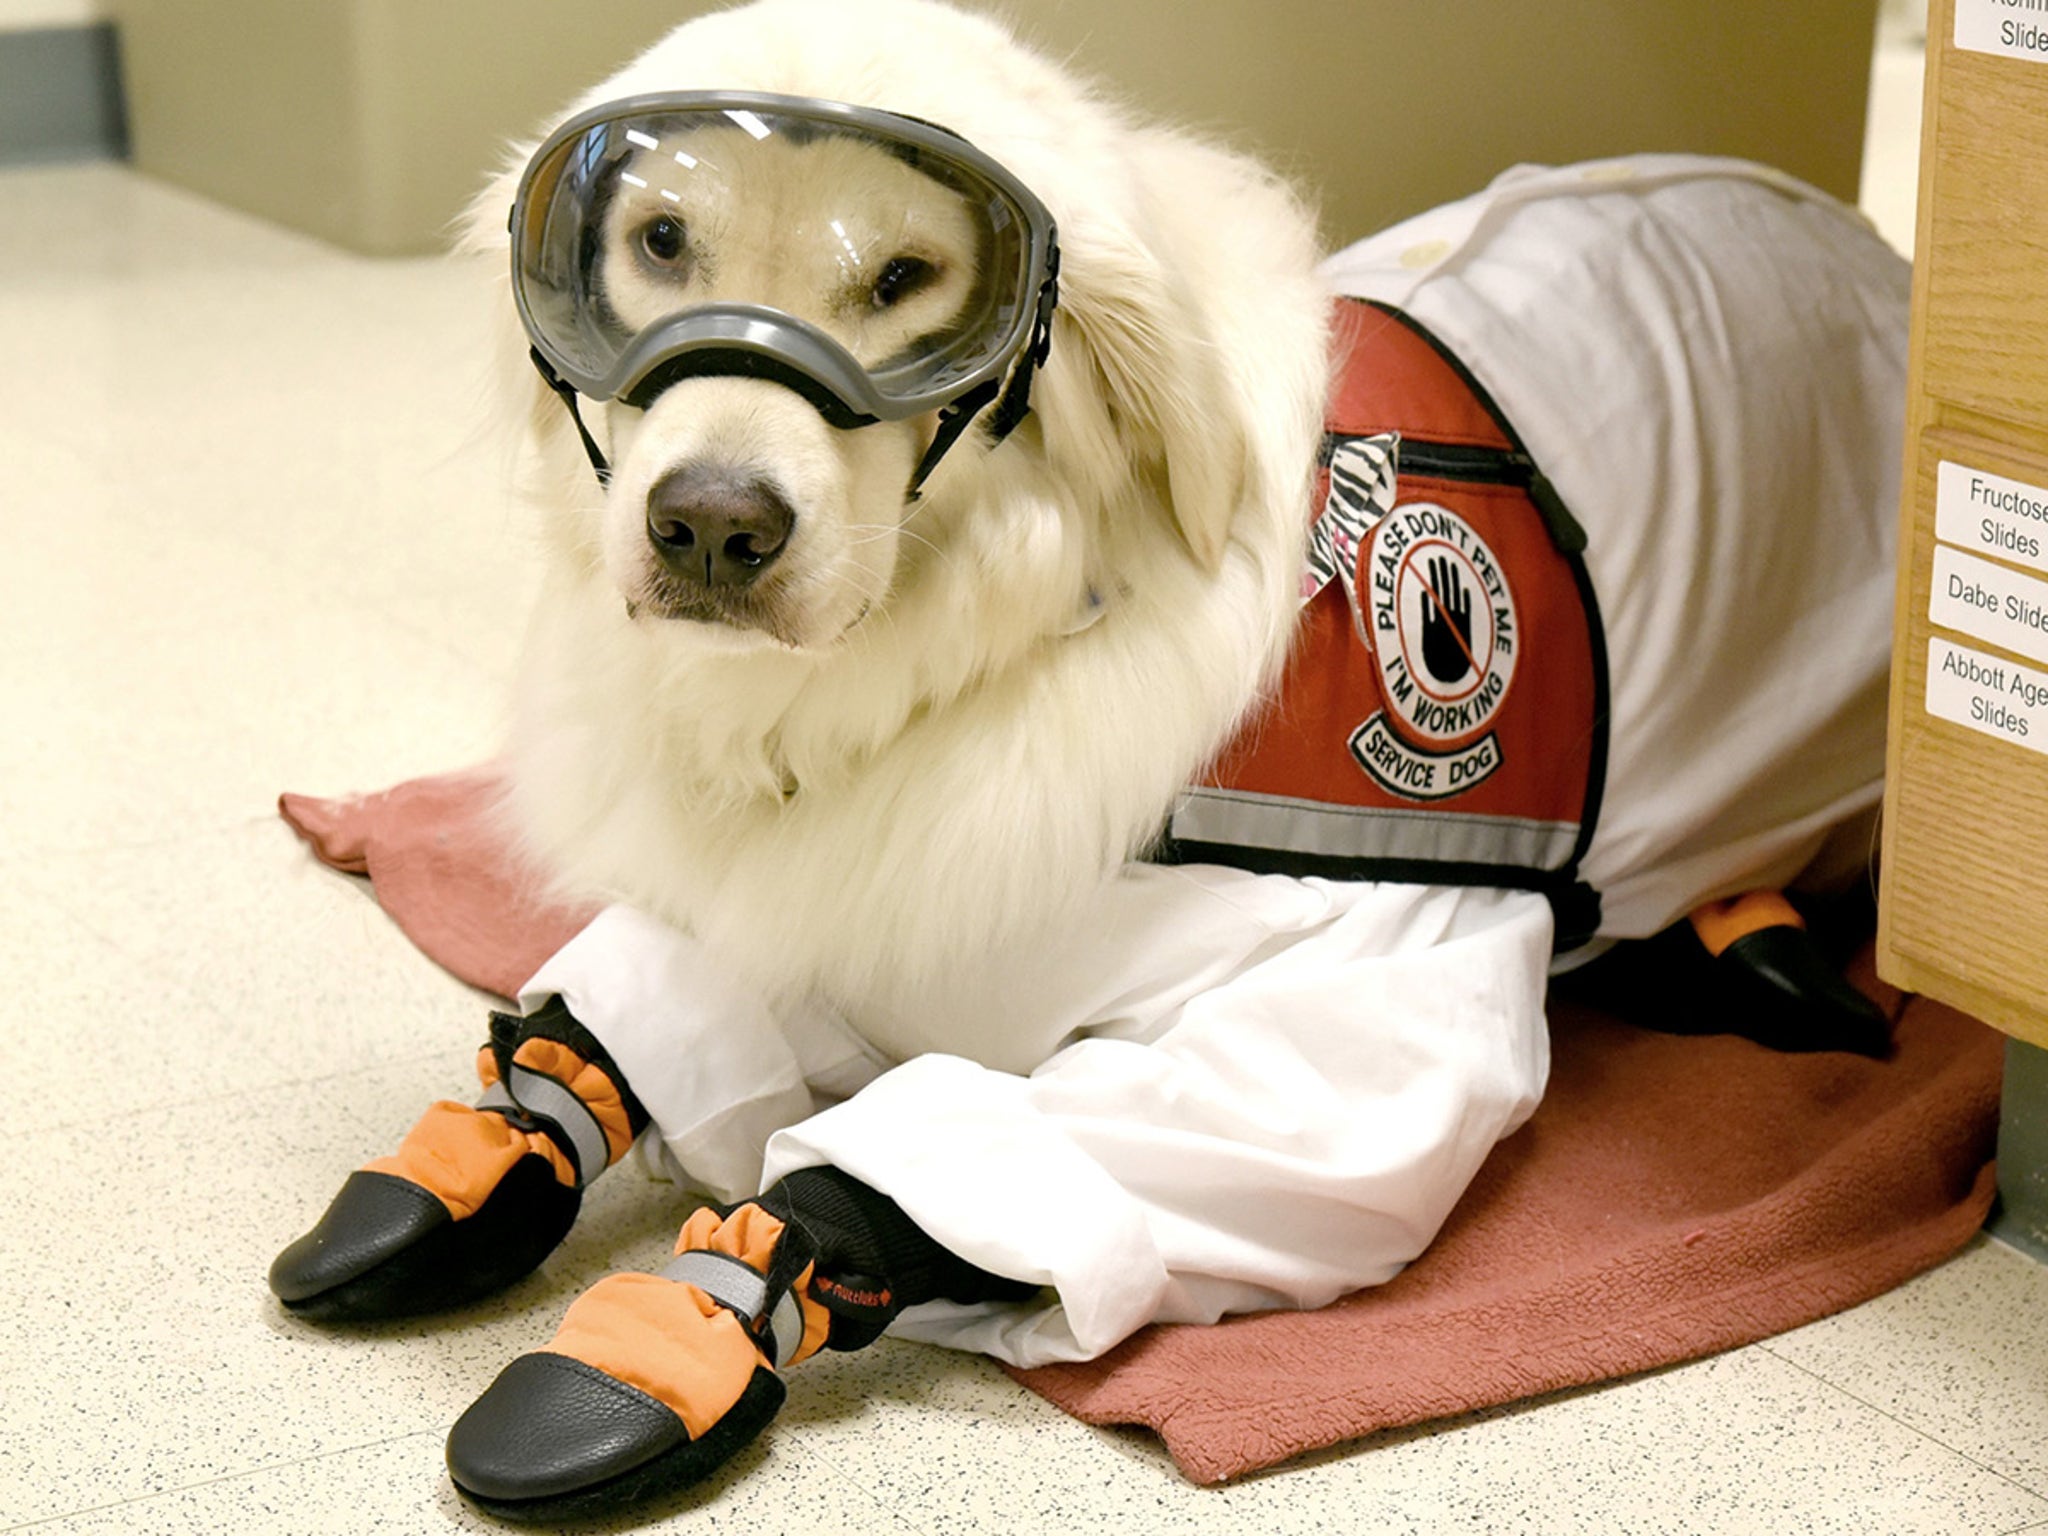 Very Good Service Dog Wears PPE to be Allowed as Scientist's Lab